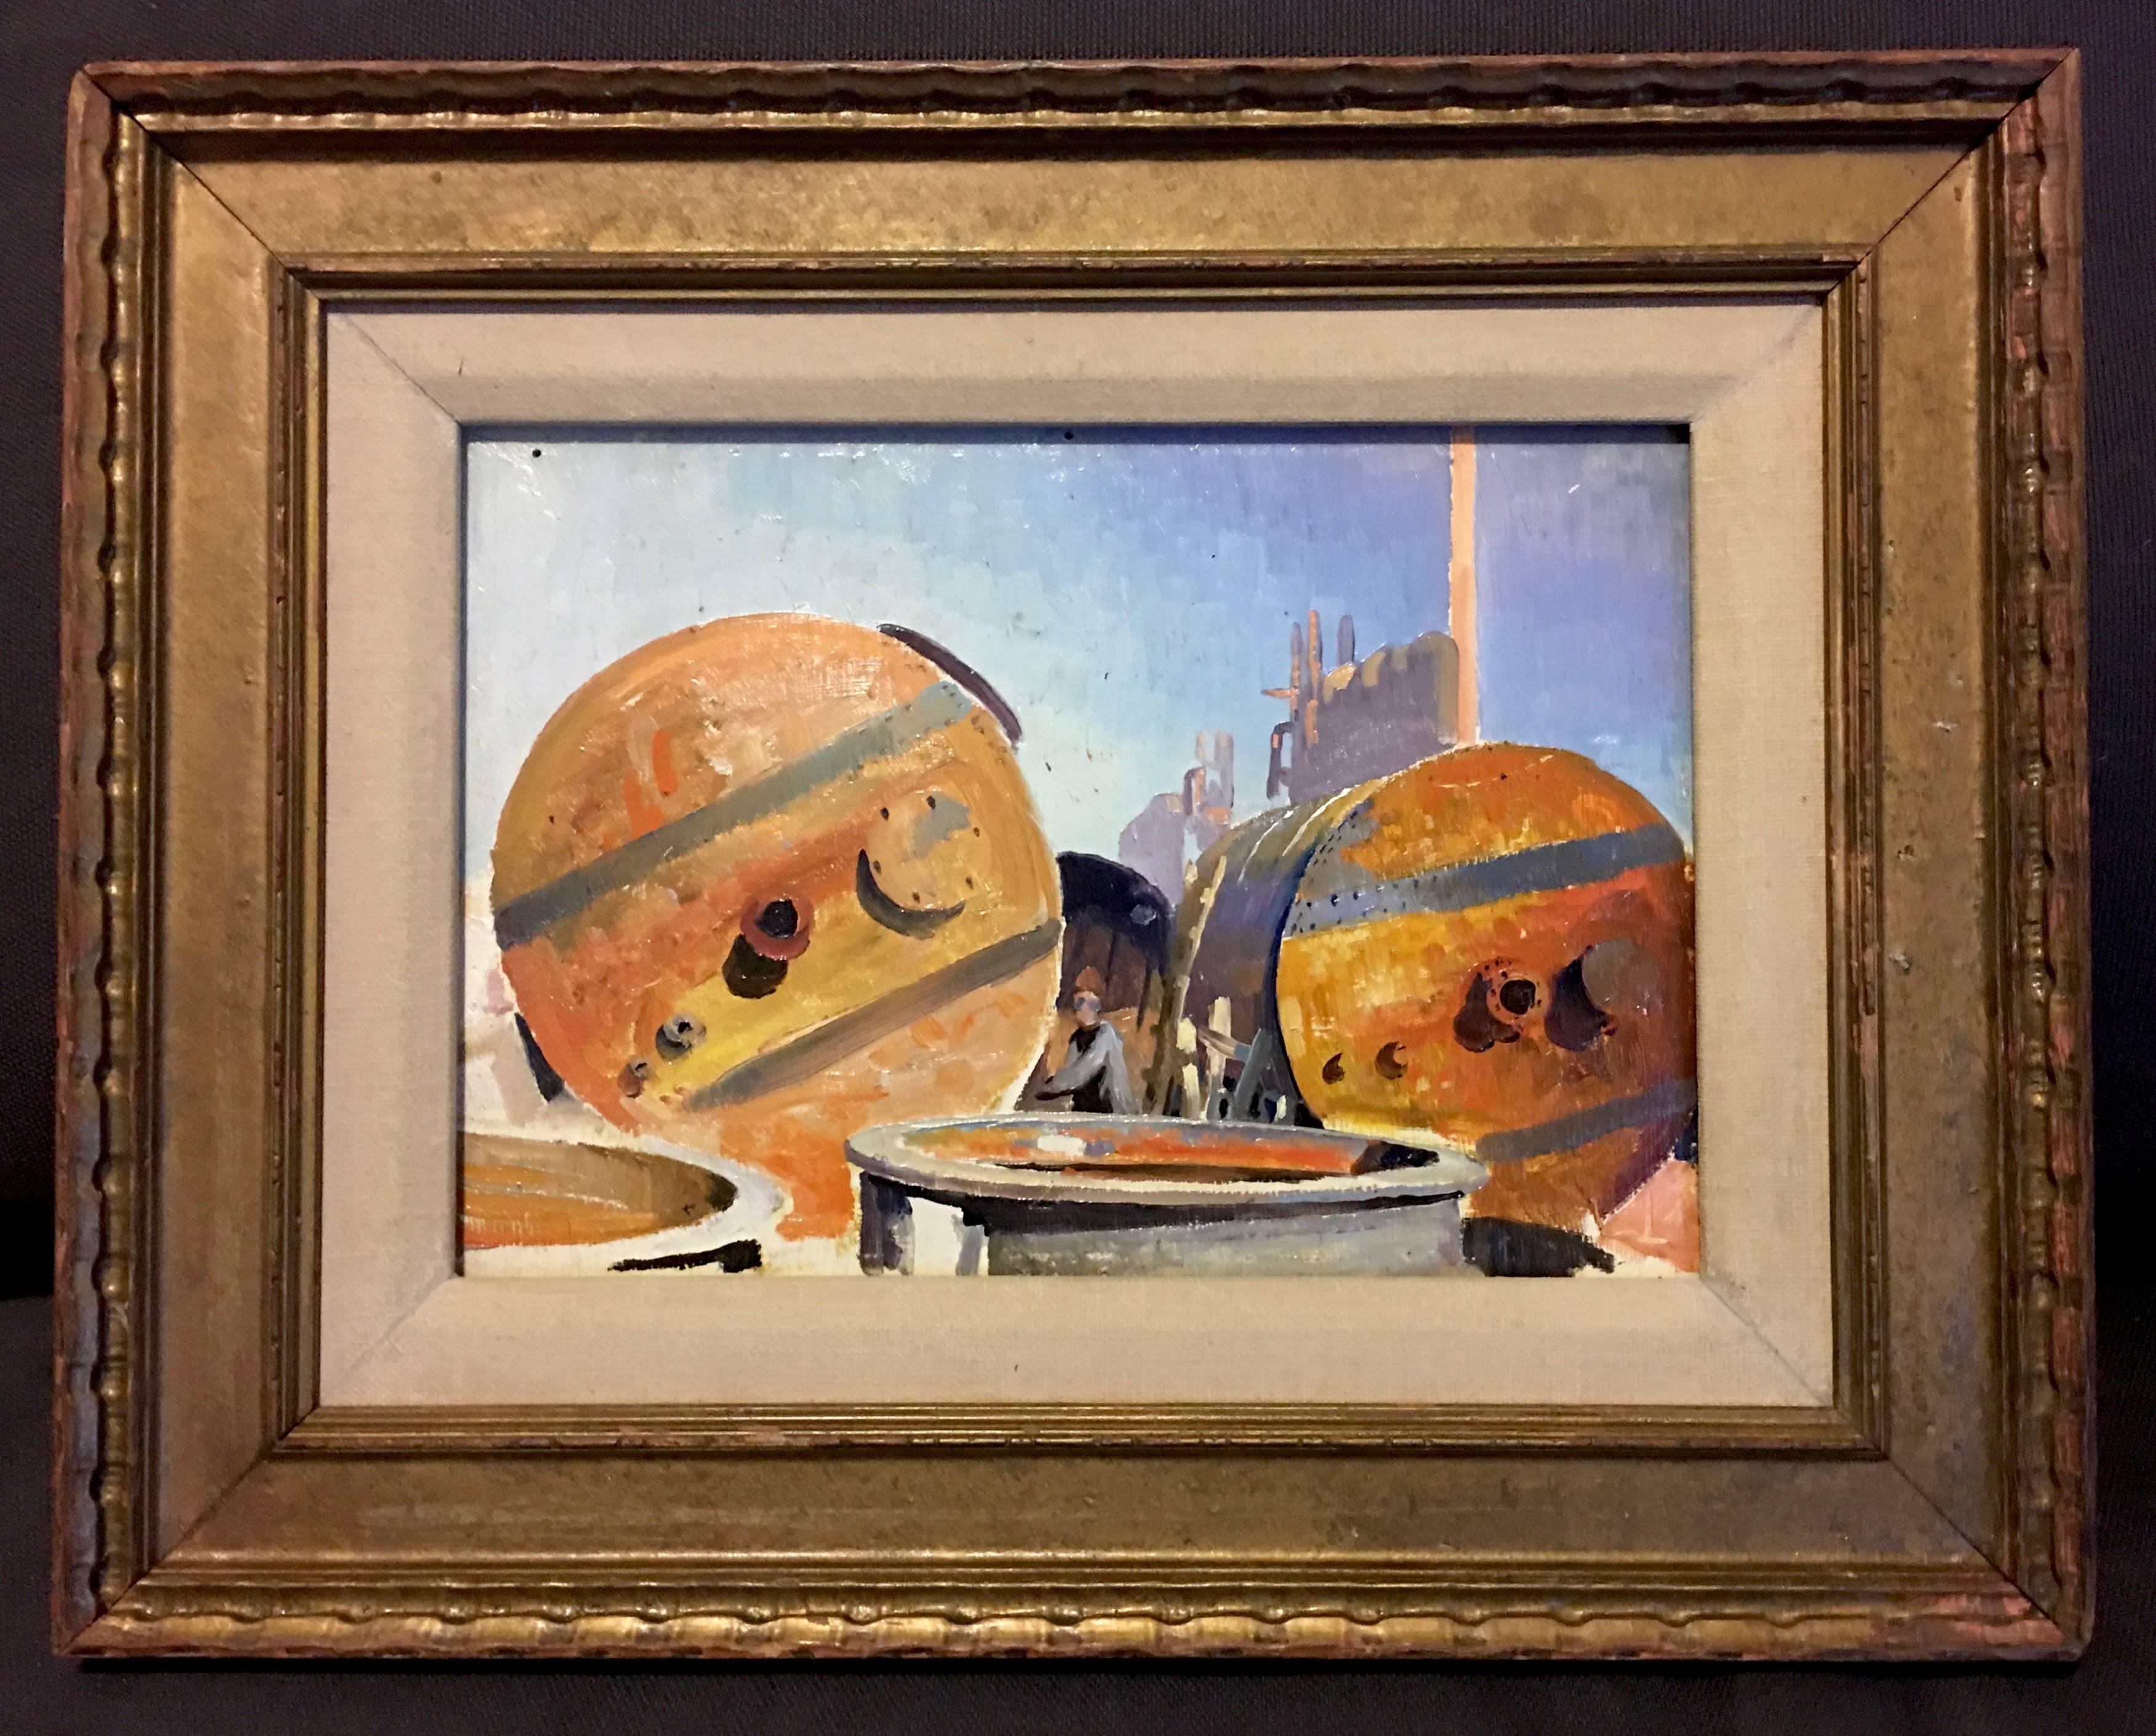 Nikolai Georgievich Kotov (attributed).
Untitled factory scene,
1936.
Oil on carboard.
6 1/4 x 9 inches (plus frame).
Stamped CCCP and unknown text in cyrillic,
inscribed in pencil 1936.
Framed.
Excellent condition.

Nikolai Georgievich